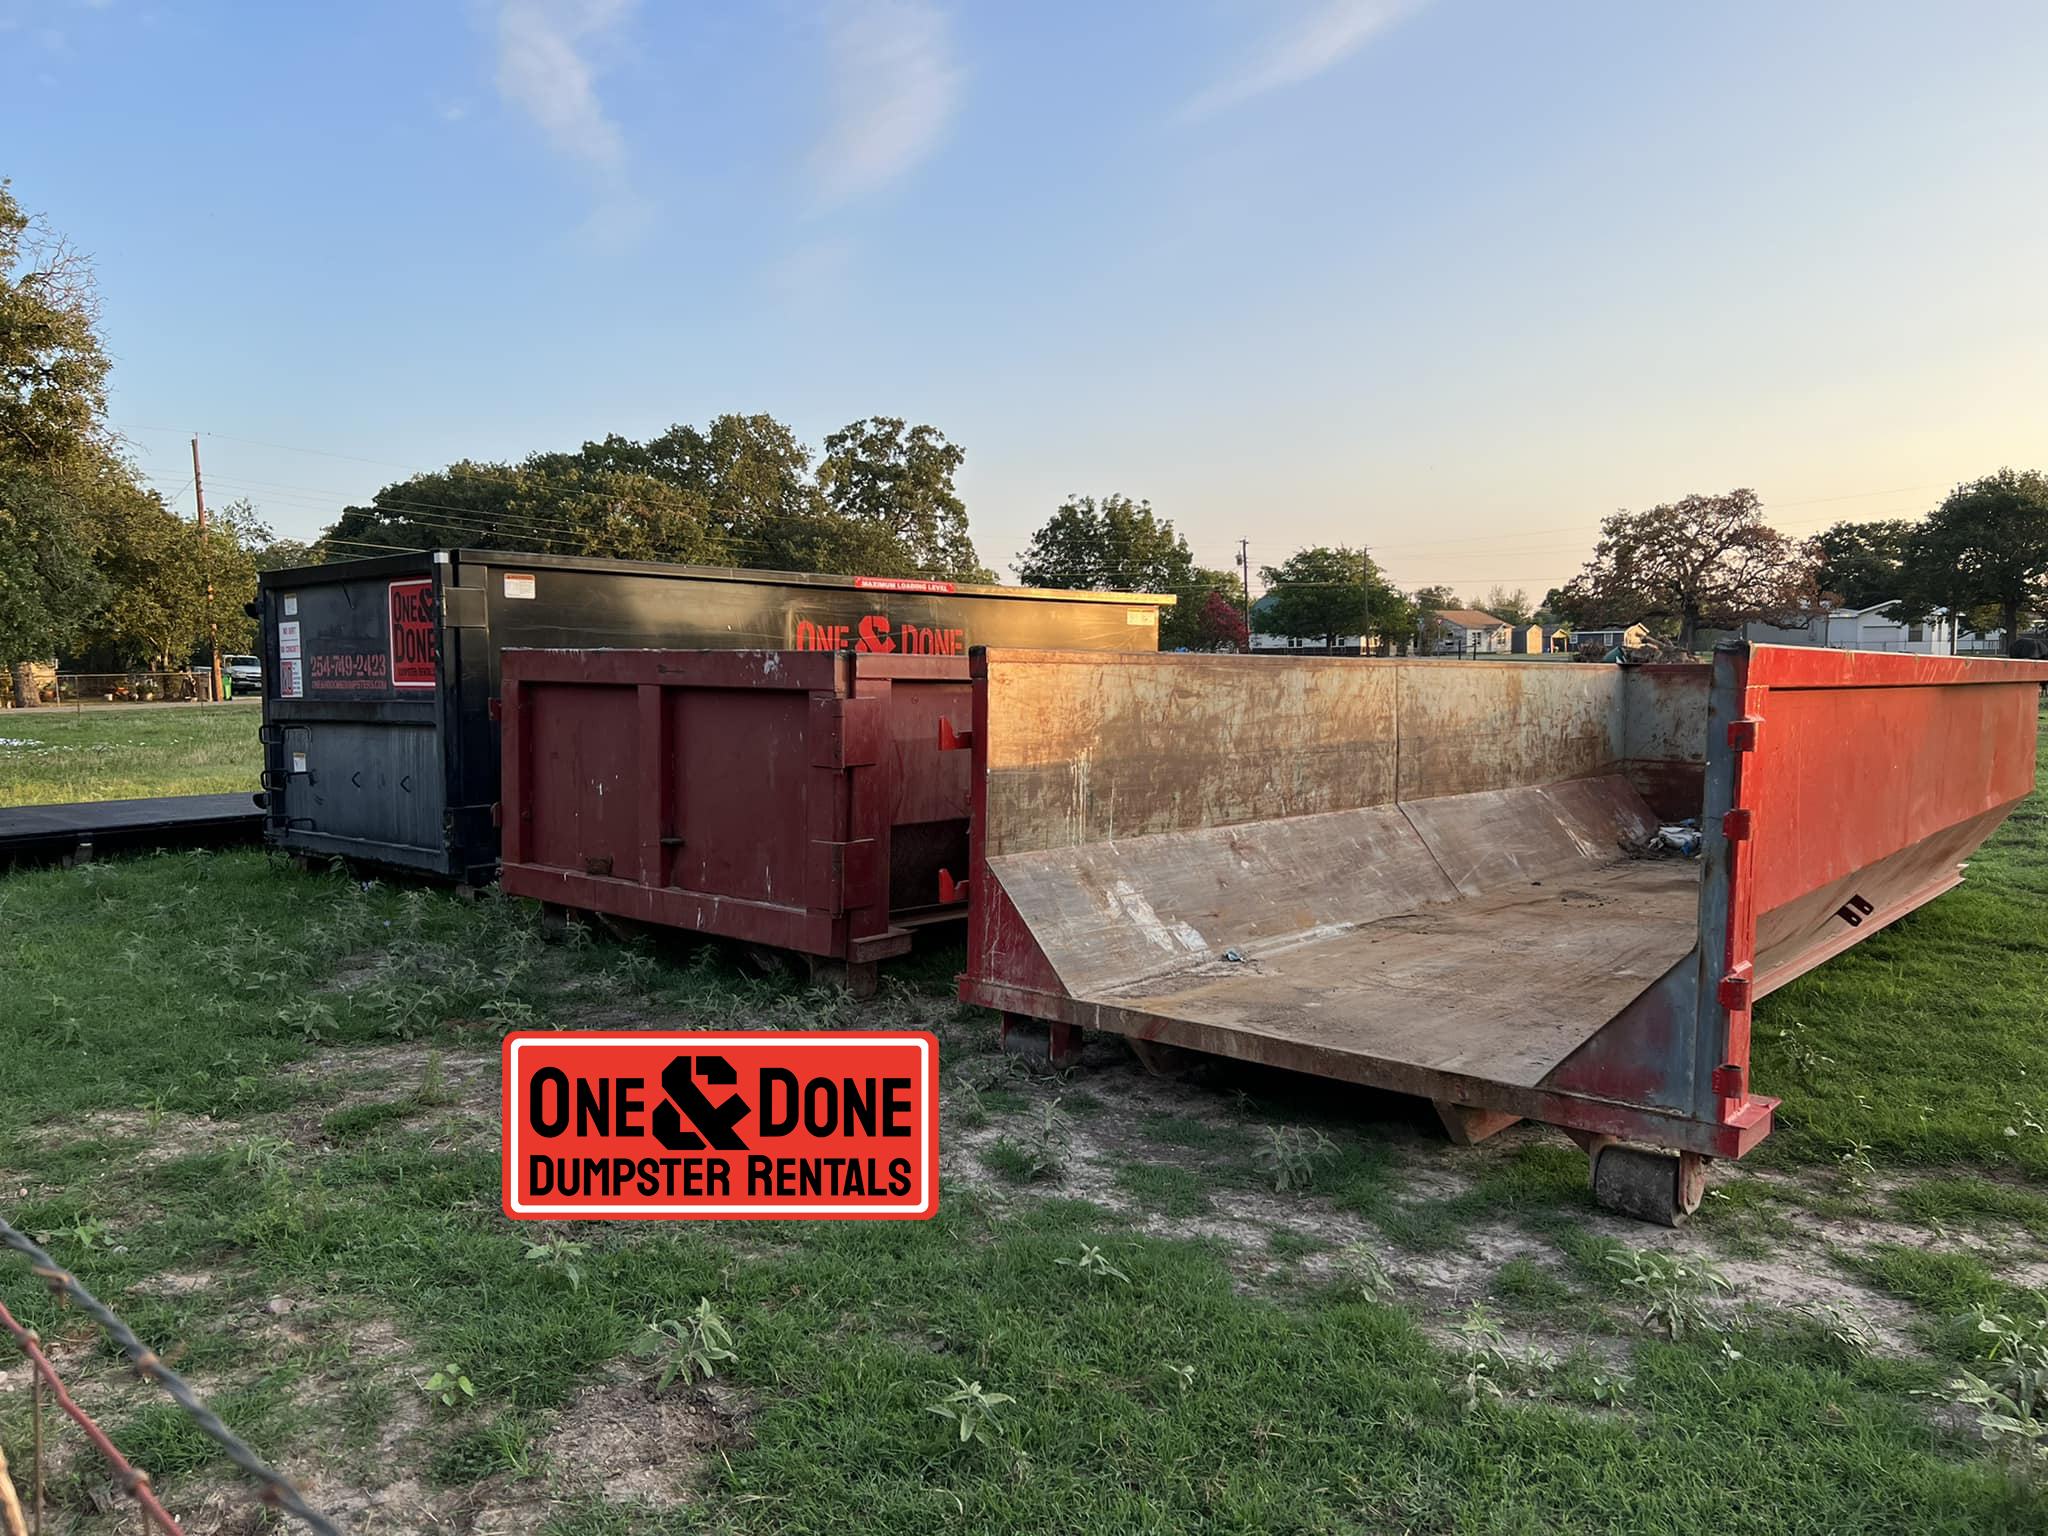 Small Dumpster Rental One and Done Dumpster Rentals McGregor TX Homeowners Use for Yard Waste